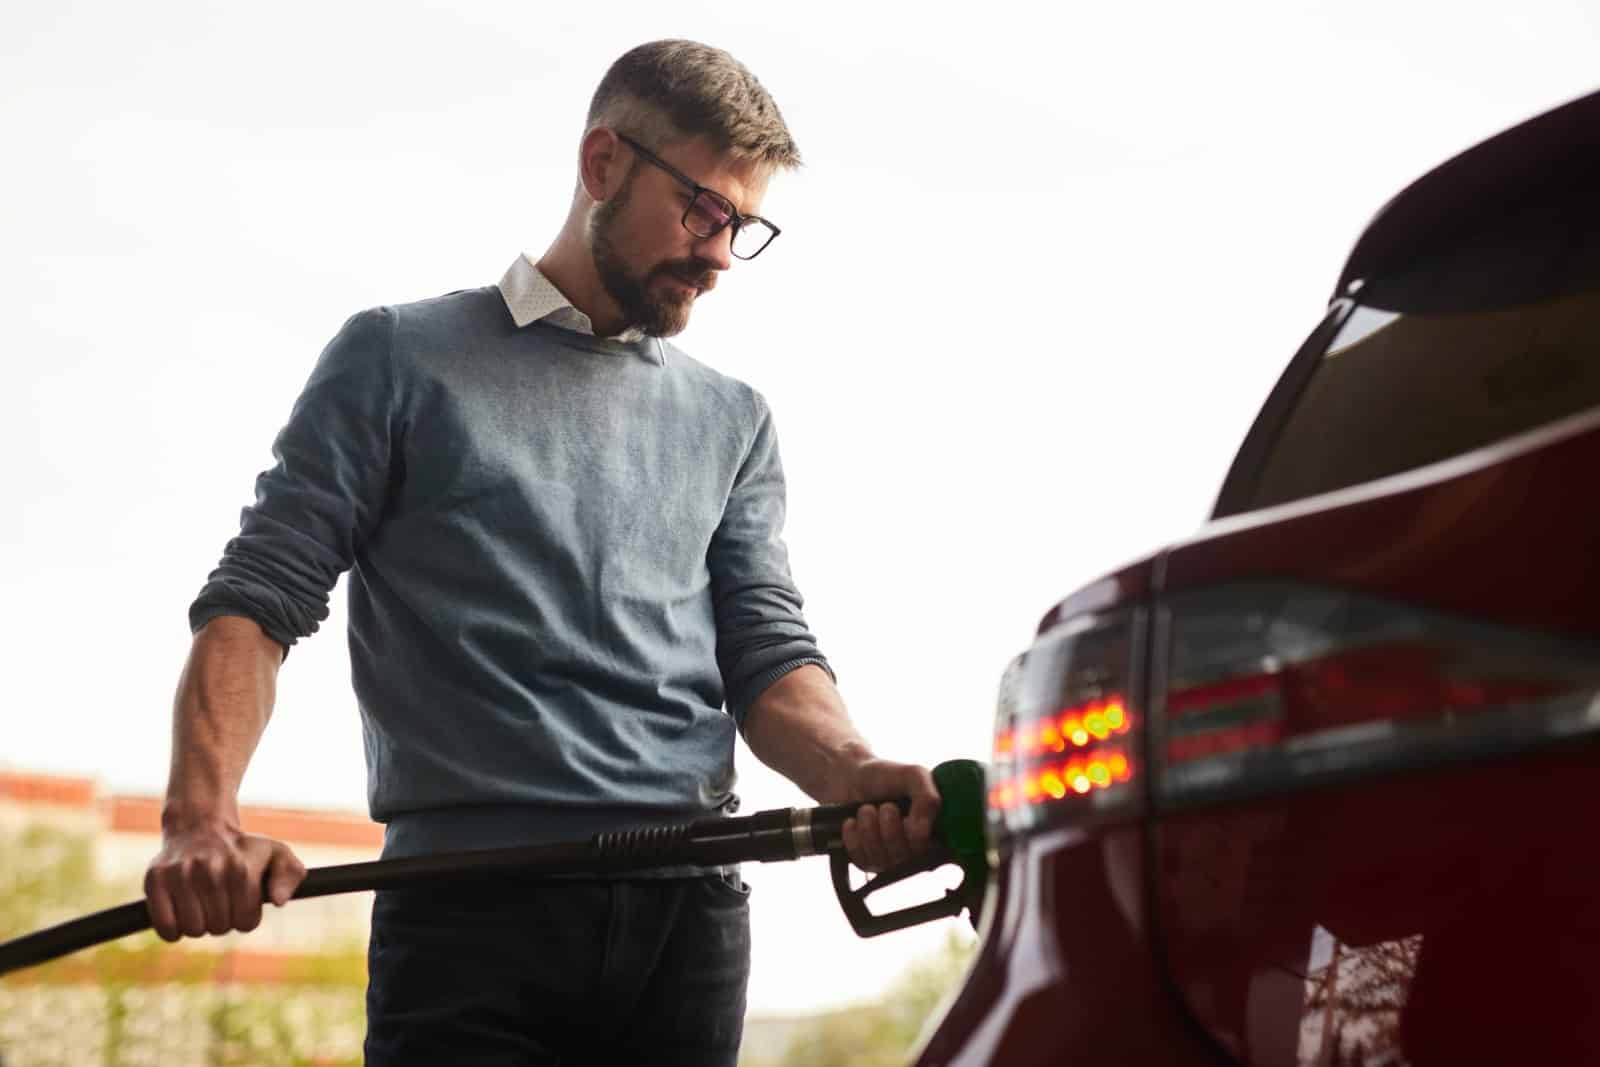 <p class="wp-caption-text">Image Credit: Shutterstock / Max kegfire</p>  <p><span>From self-service to full-service stations, fueling up can differ. Also, remember it’s “petrol,” not gas, and knowing the difference between diesel and unleaded is crucial.</span></p>